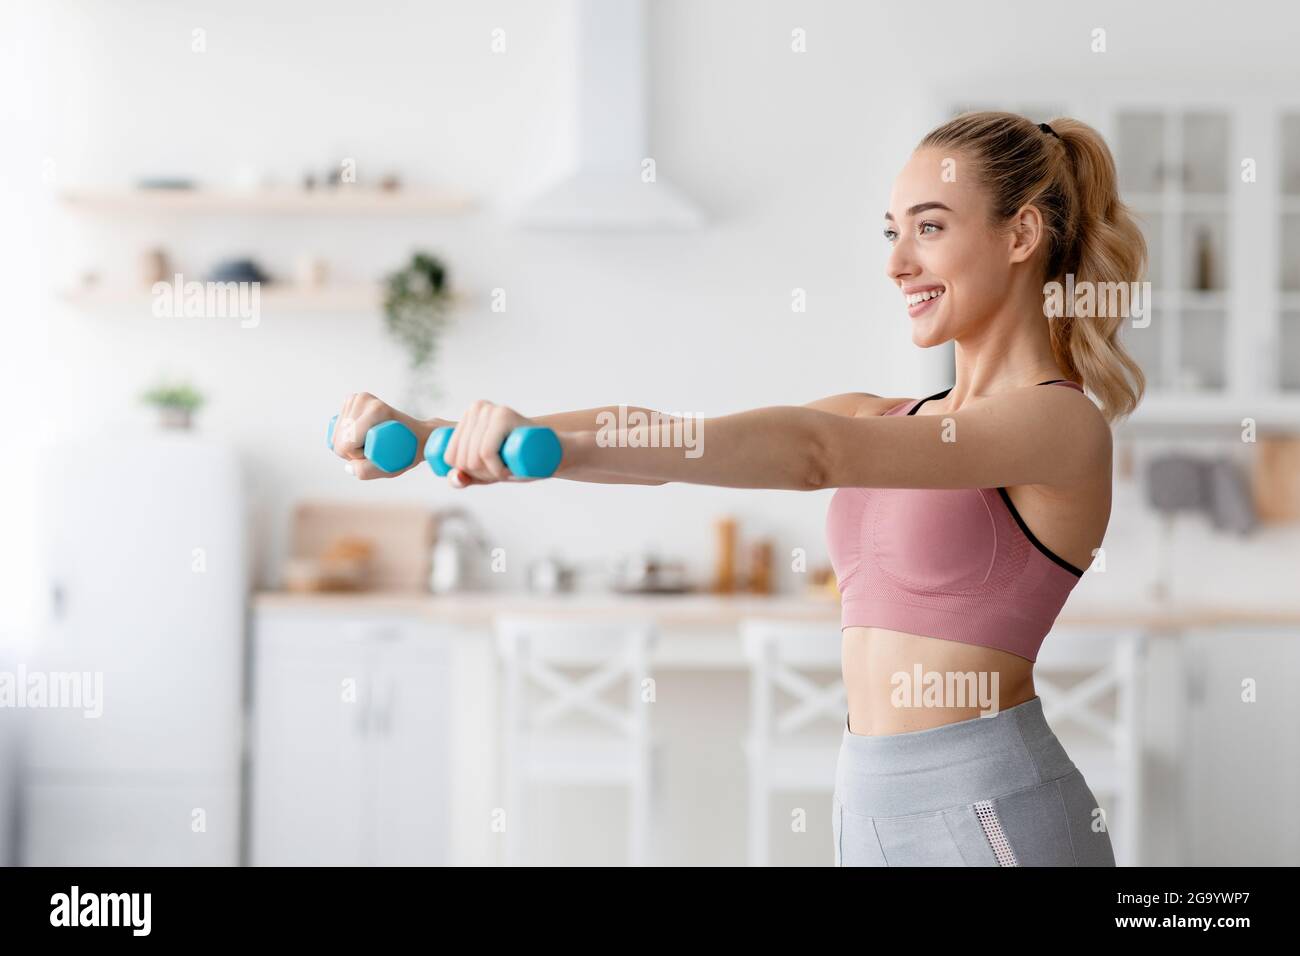 Active sports, physical training at home gym, covid-19 quarantine Stock Photo